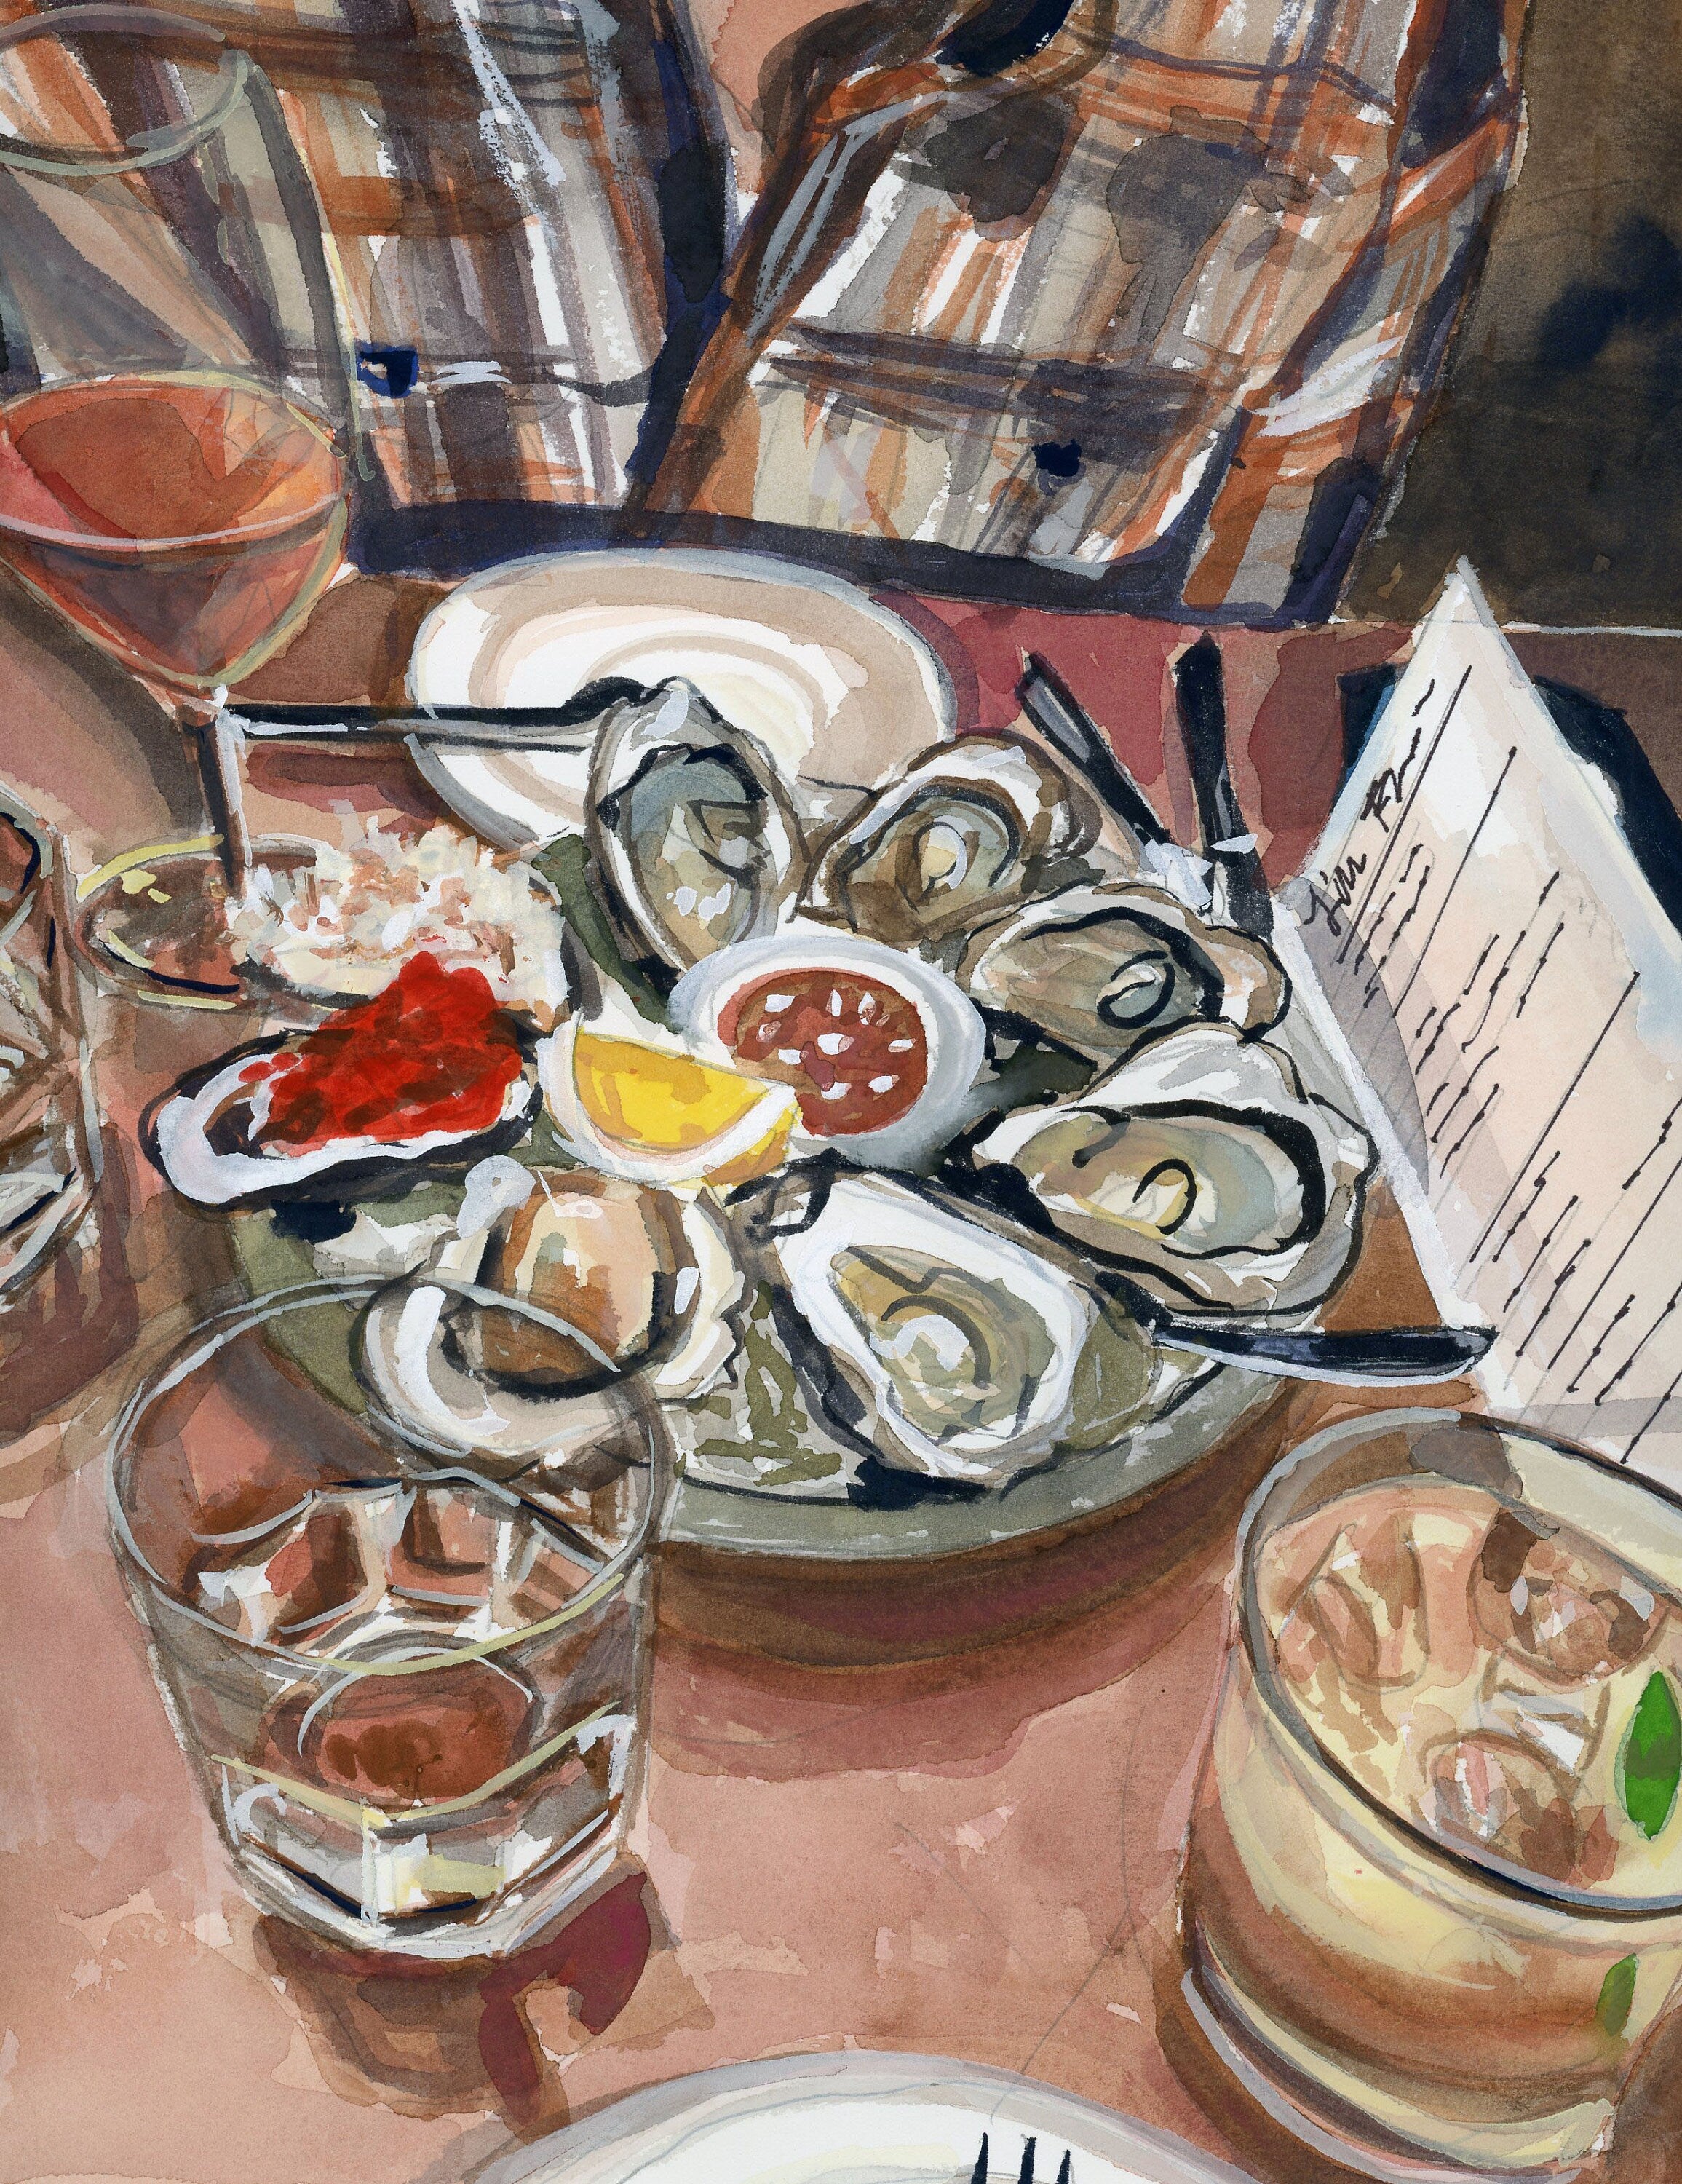 Oyster date night print of painting by Medjool Studio. Print of original gouache painting of a "date night" including oysters and drinks at Bar Raval in Toronto, Canada. 